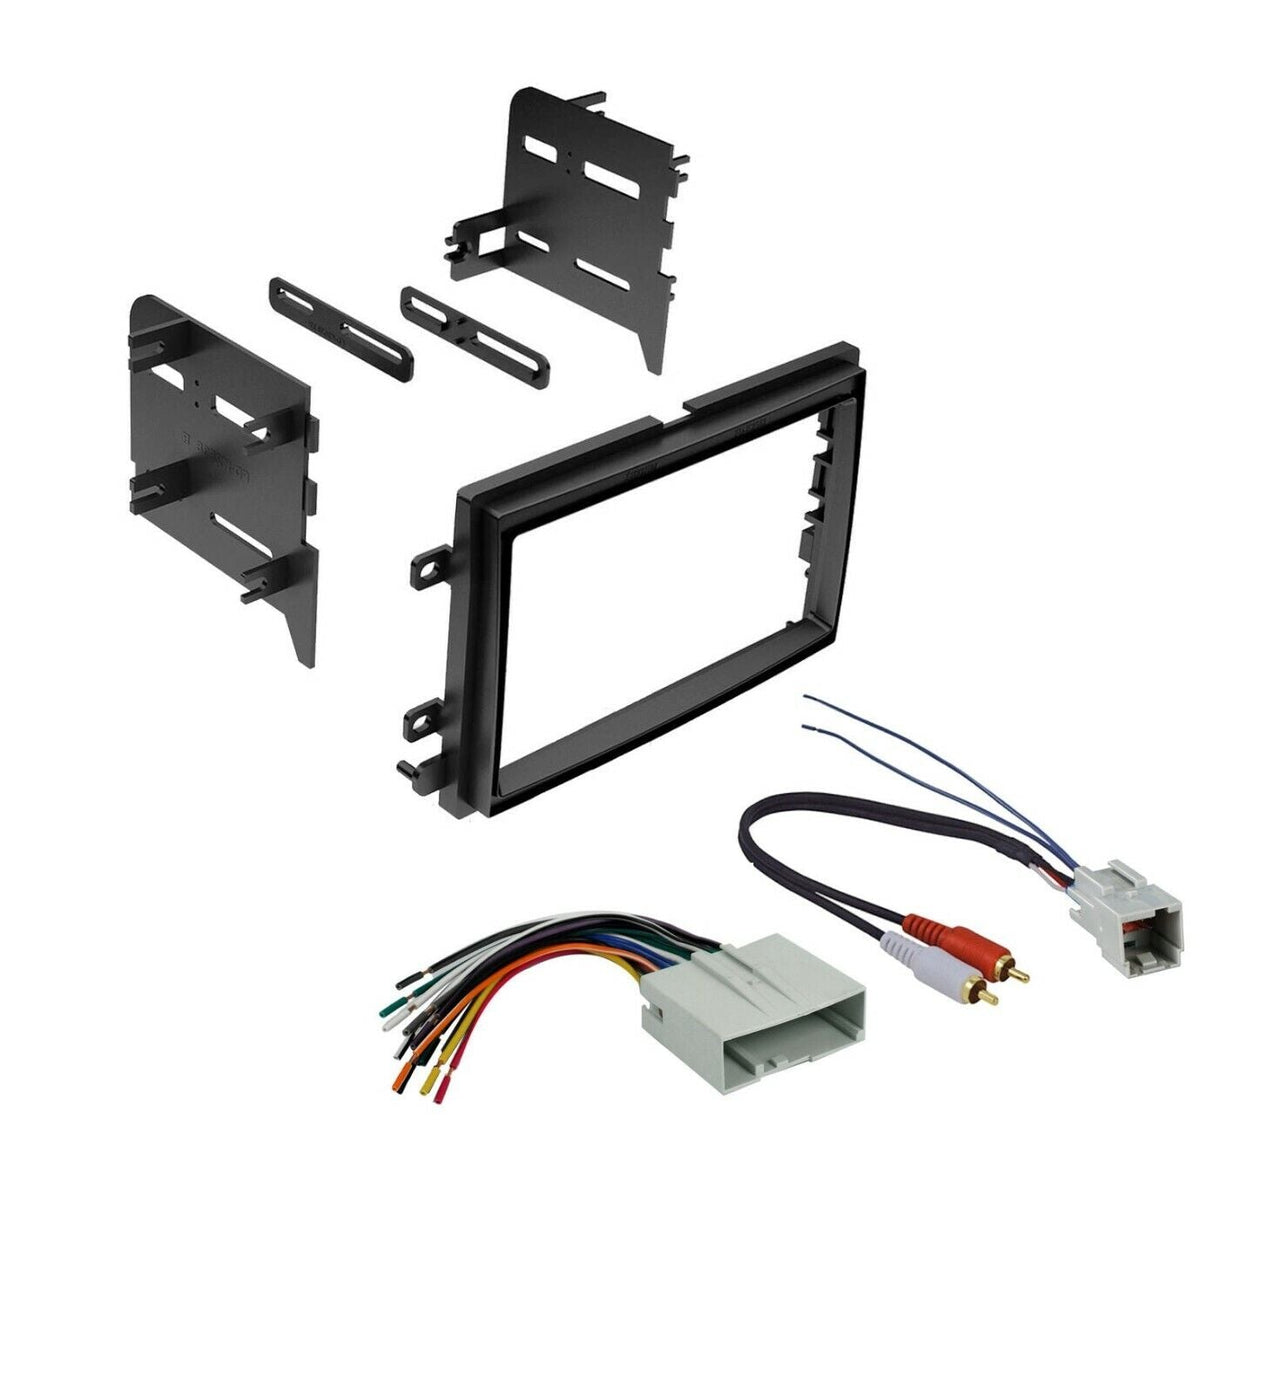 Double DIN Radio Dash Stereo Dash Kit compatible with 04-15 Ford F-150 With Wire Harness